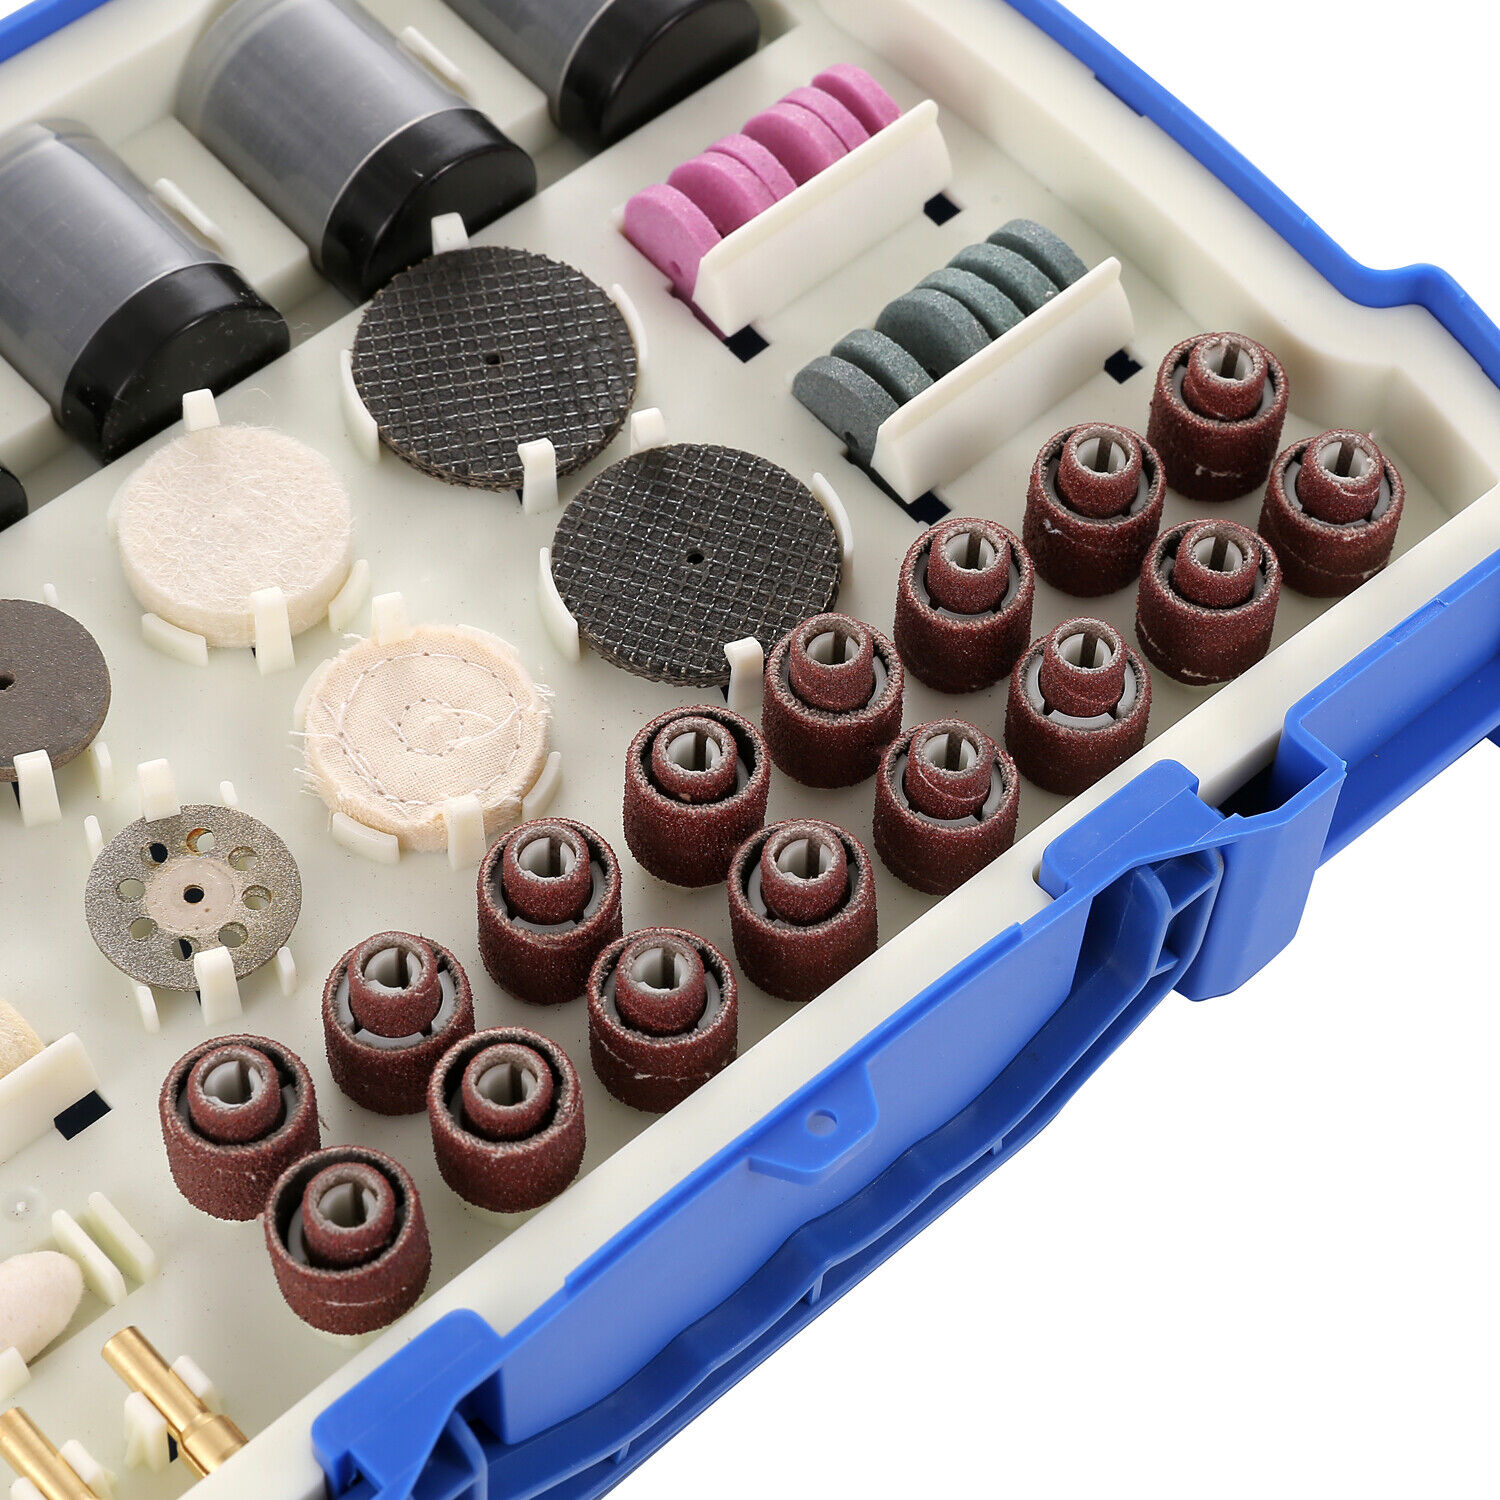 451PC Rotary Tool Accessories Kit For Grinding and Polishing Metal Surfaces  Jewelery Hardware Woodwork Plastics Ceramics Glass - AliExpress